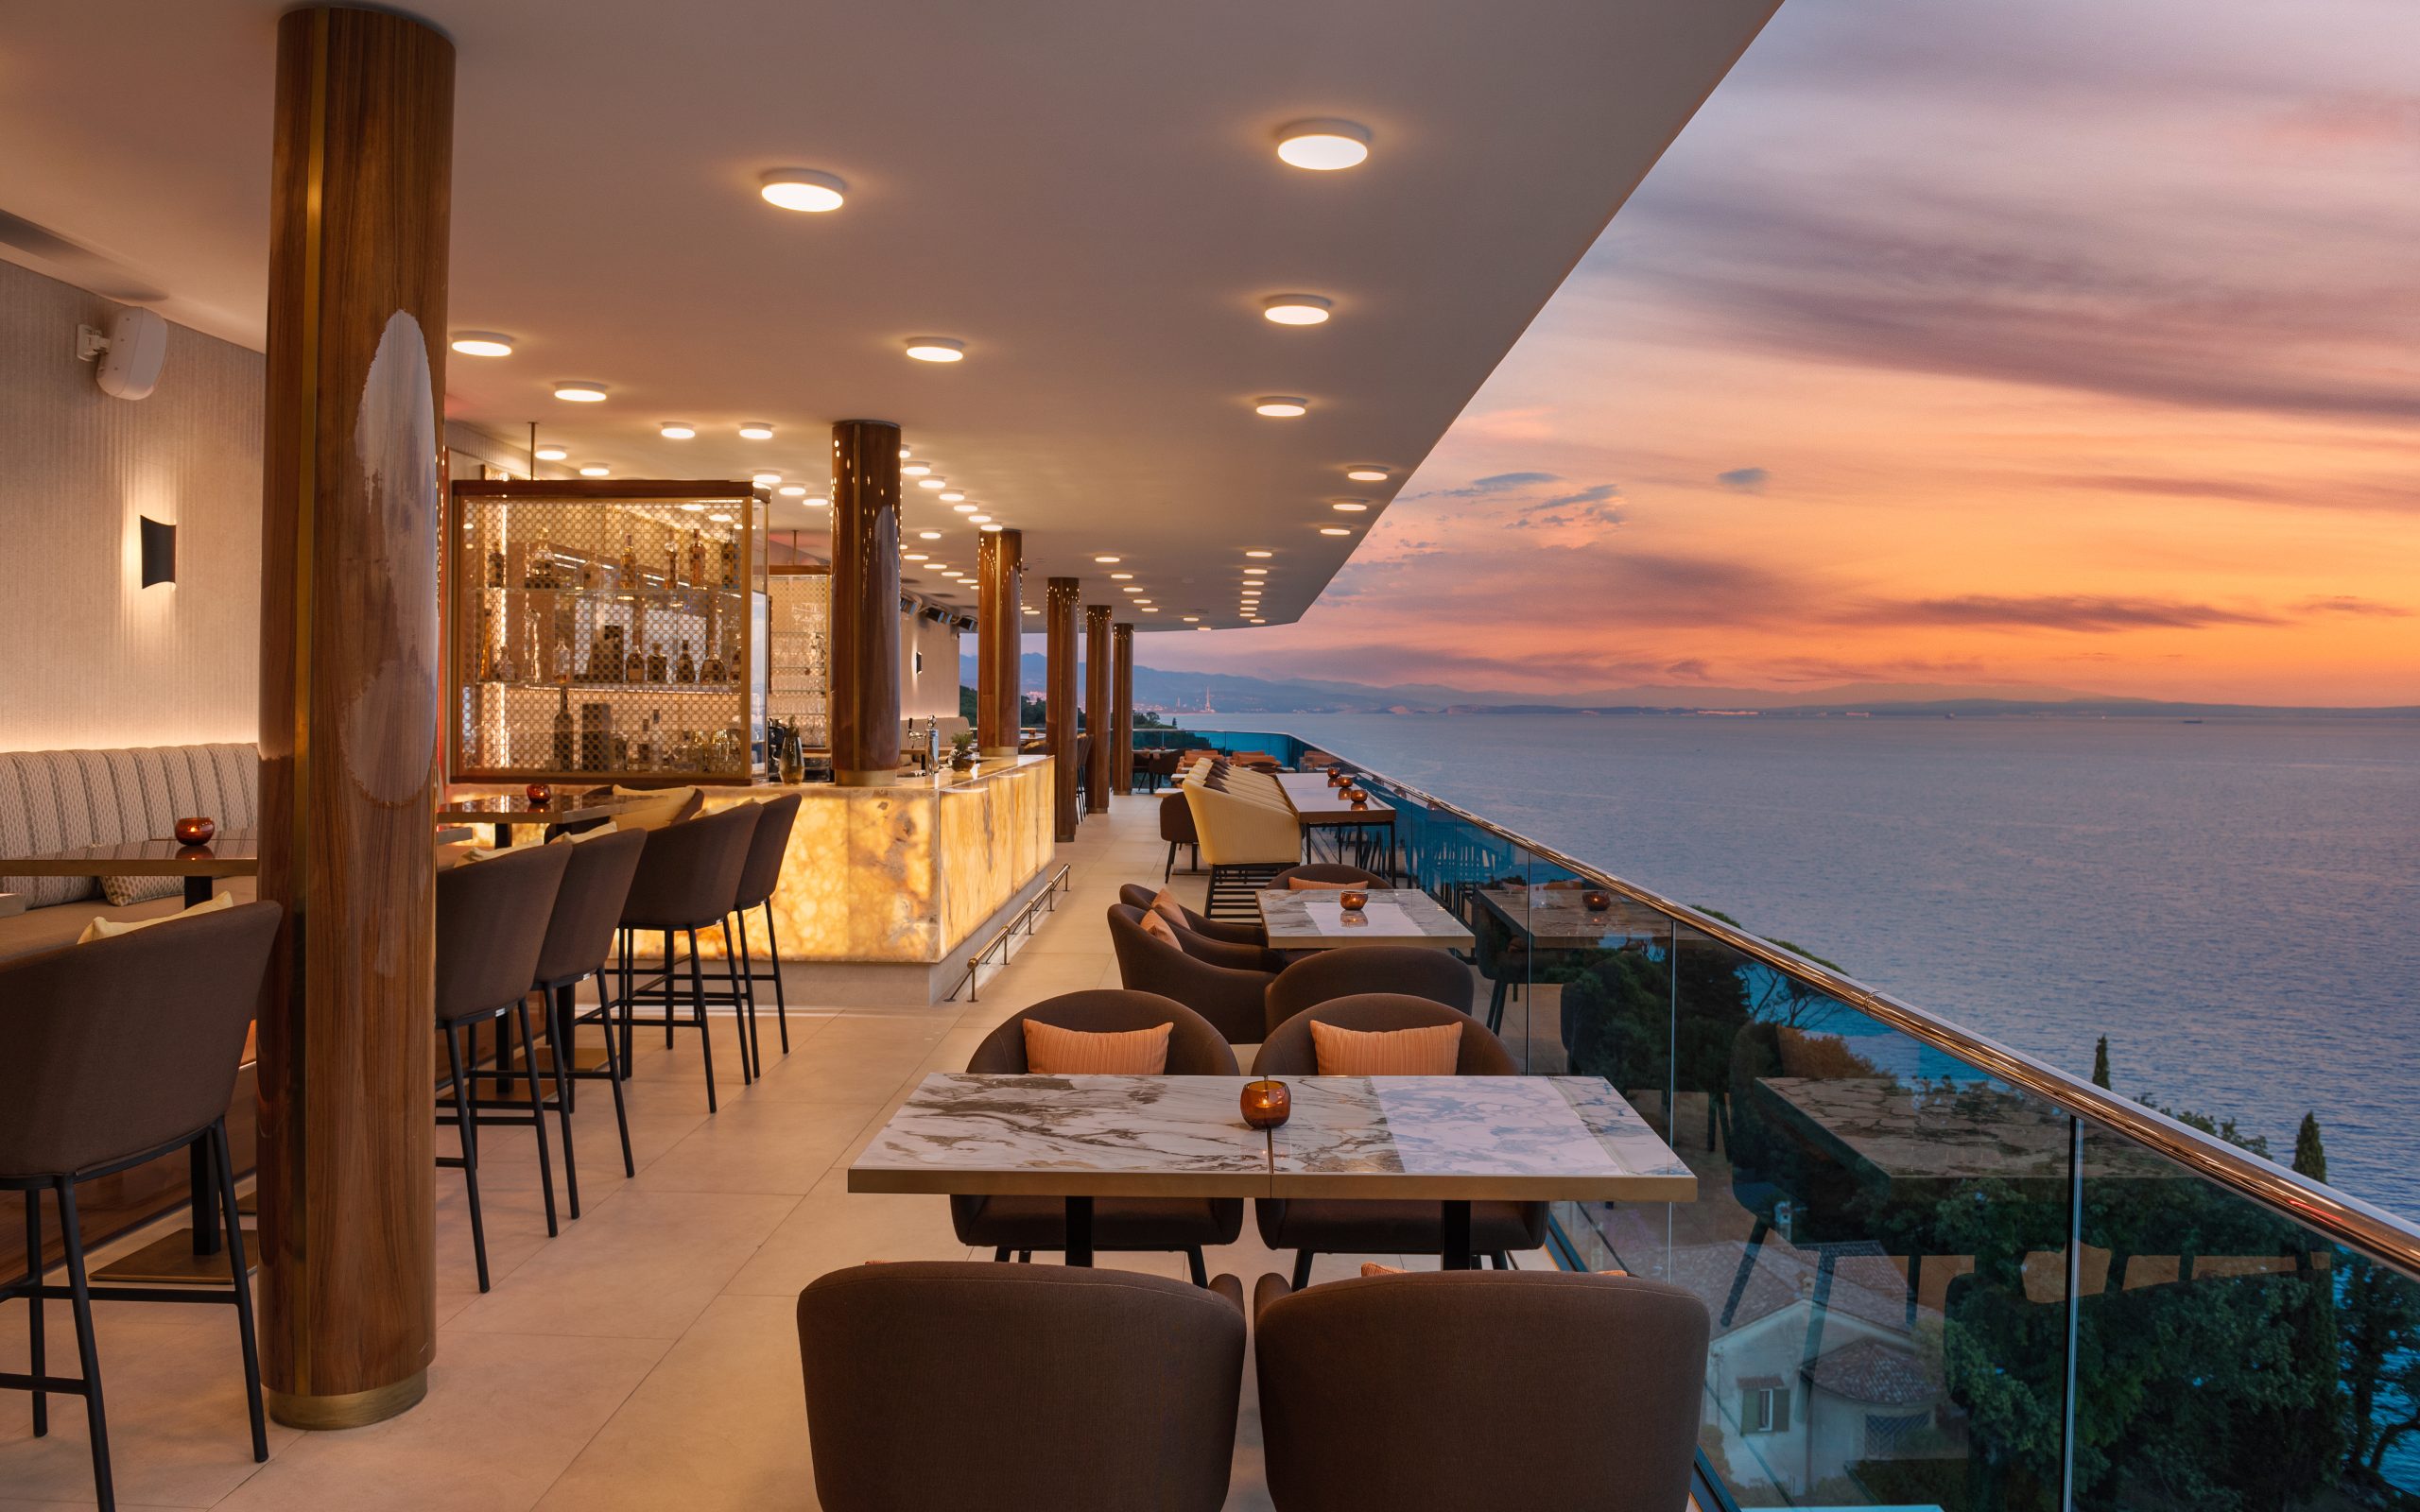 Nebo Restaurant & Lounge - Enjoy endless views of the Adriatic as DJs play of-the-moment tracks.